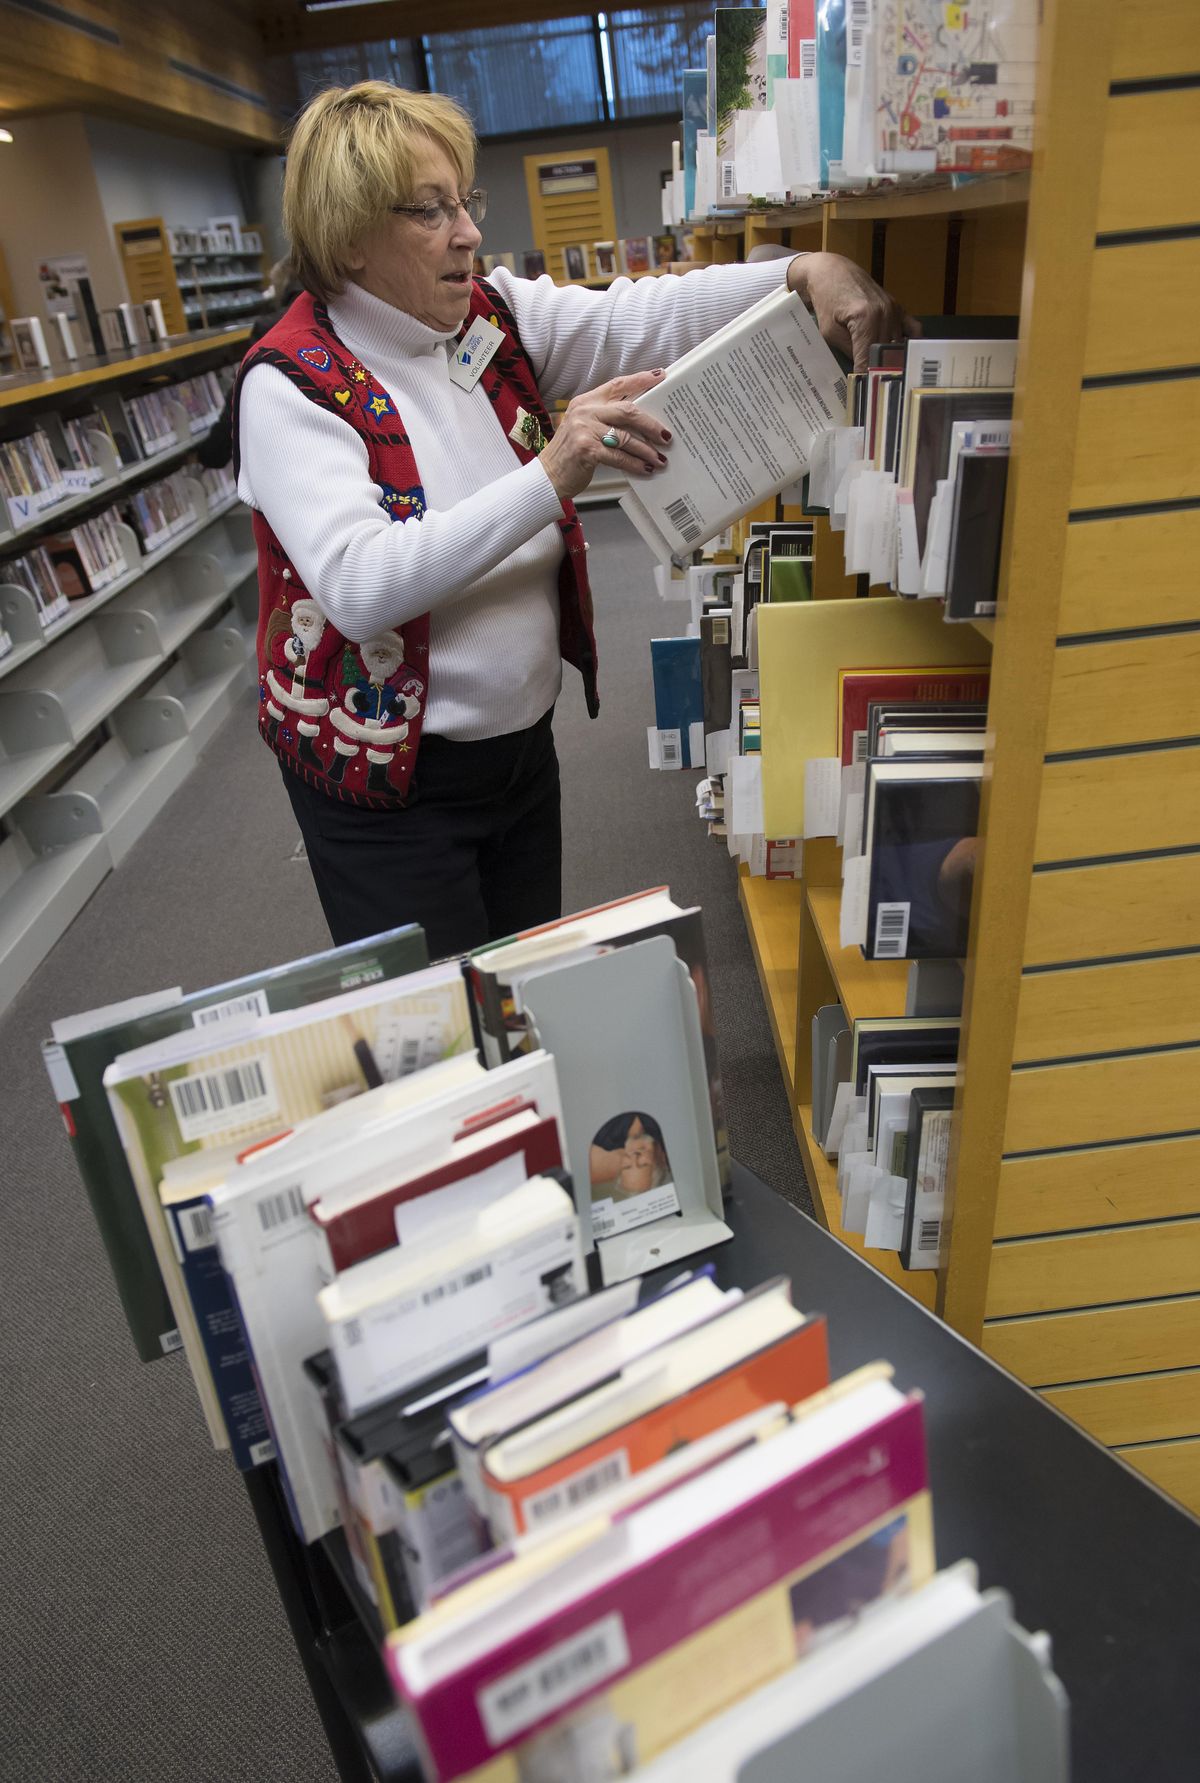 Anne Sanders, a volunteer at Spokane Public Library’s South Hill branch, shelves books on reserve for people, Friday, Dec 22, 2017. (Colin Mulvany / The Spokesman-Review)